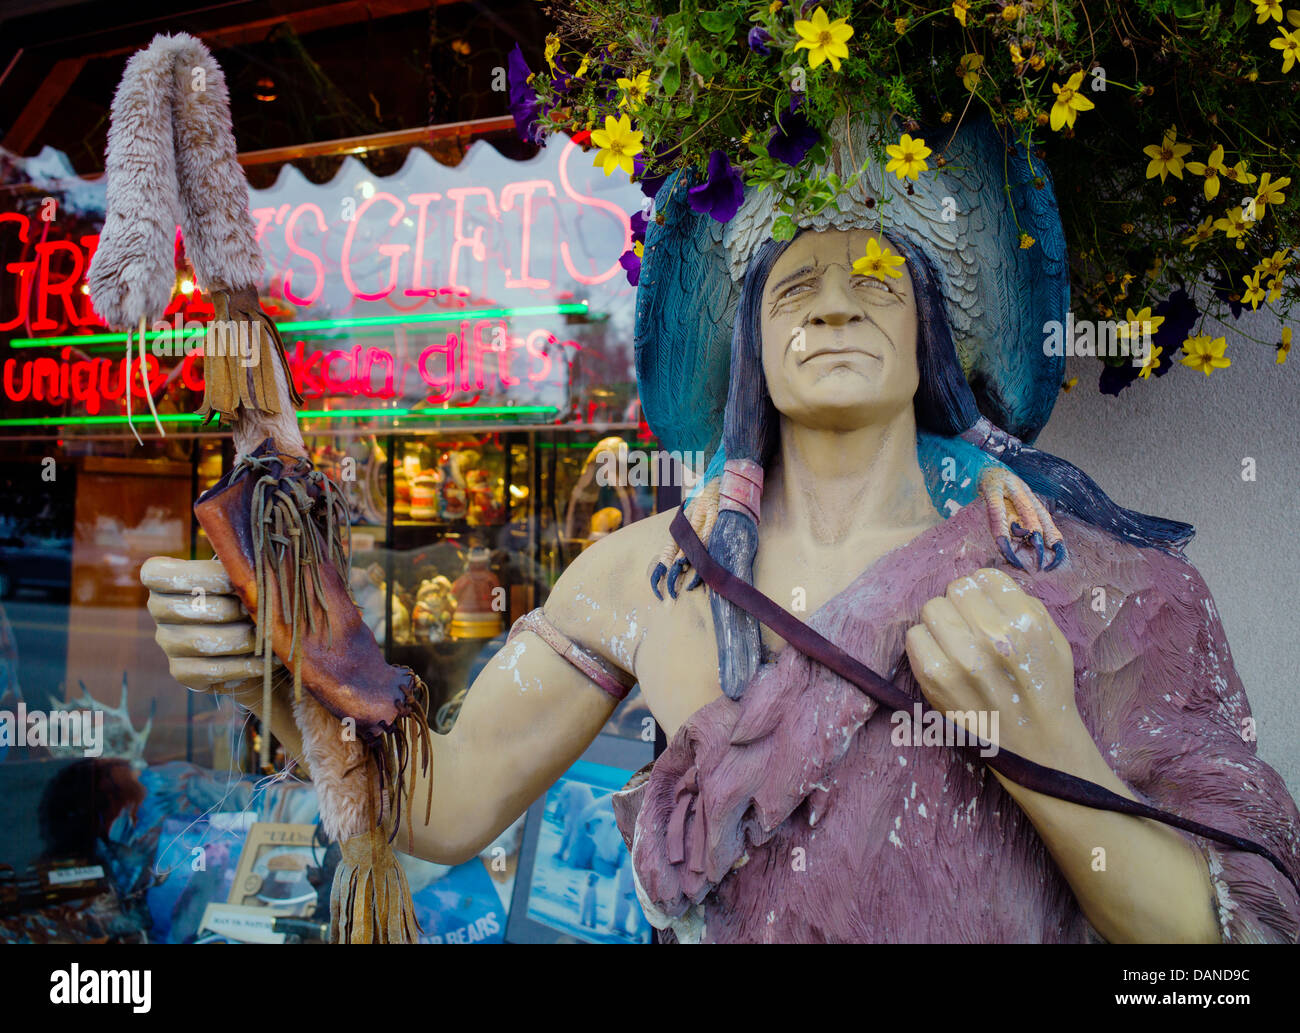 Lifesize statues of Native American Indians decorate the Grizzly's Unique Alaskan Gifts store, Anchorage, Alaska, USA Stock Photo